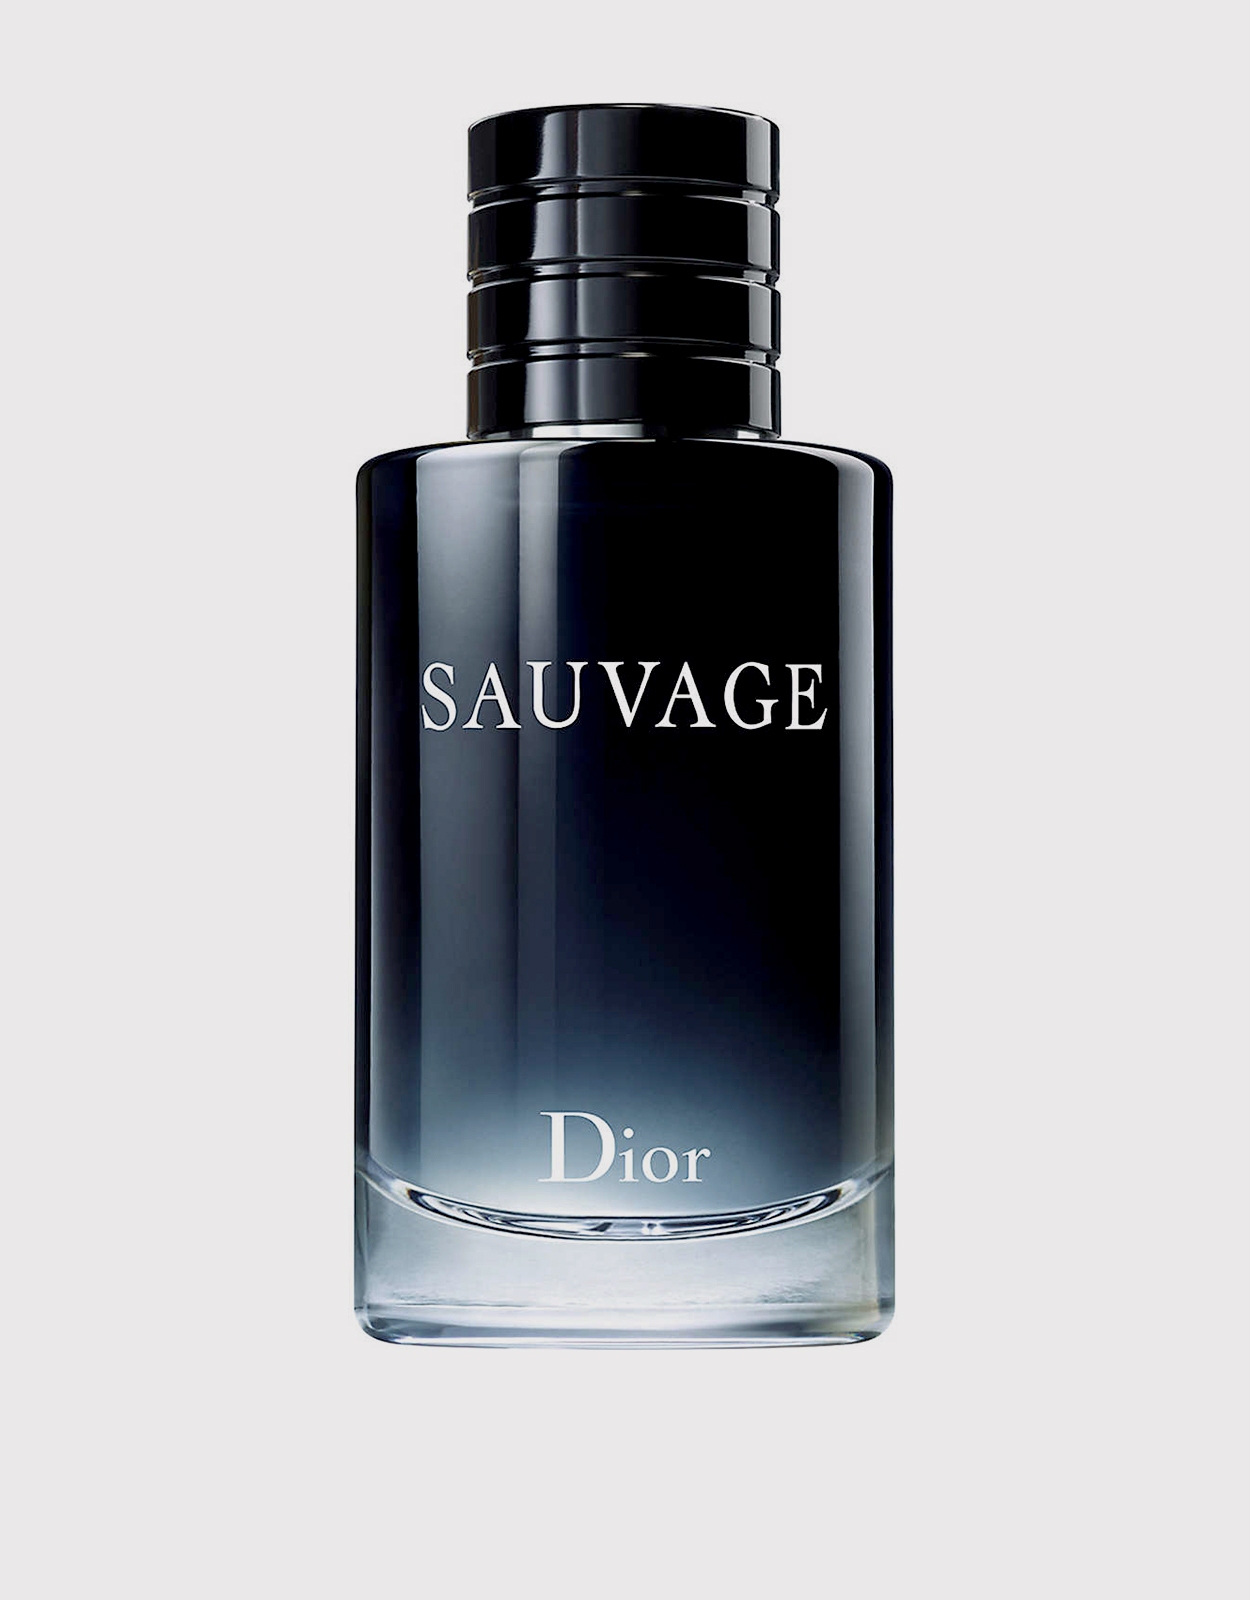 Aromatic Star Anise Inspired By Dior's Sauvage Eau De Toilette